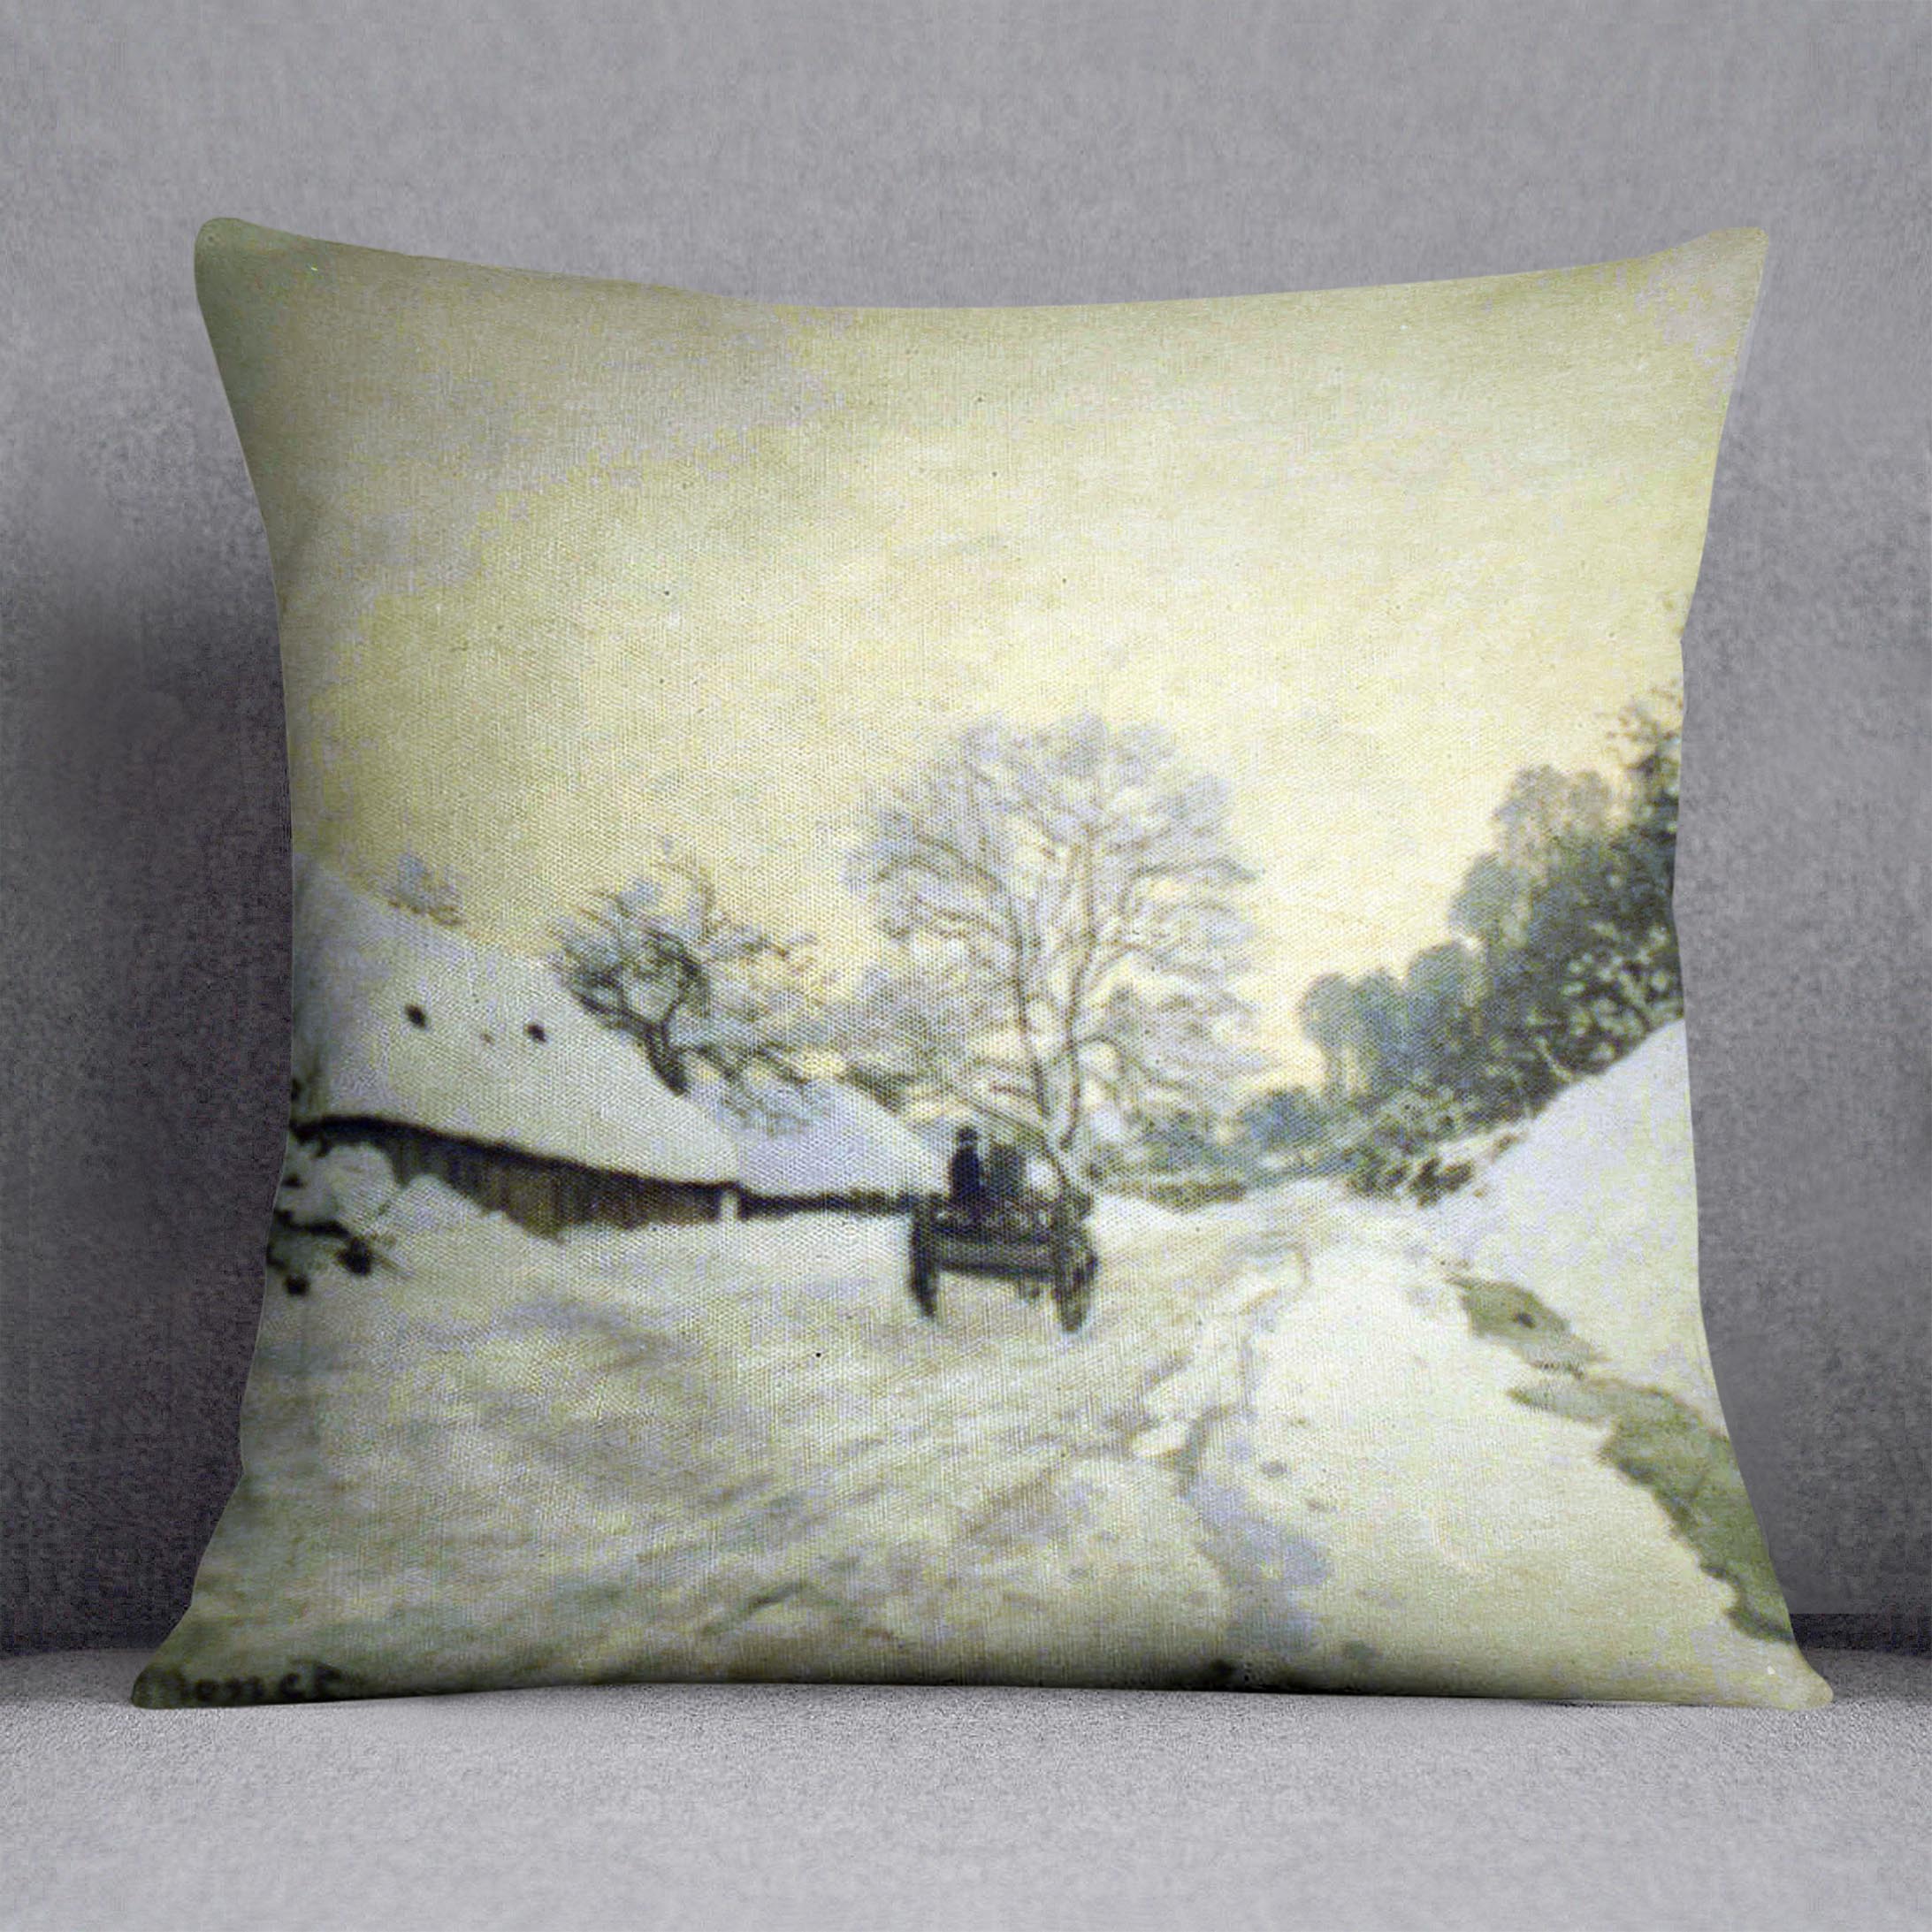 Orsay Brut By Manet Cushion